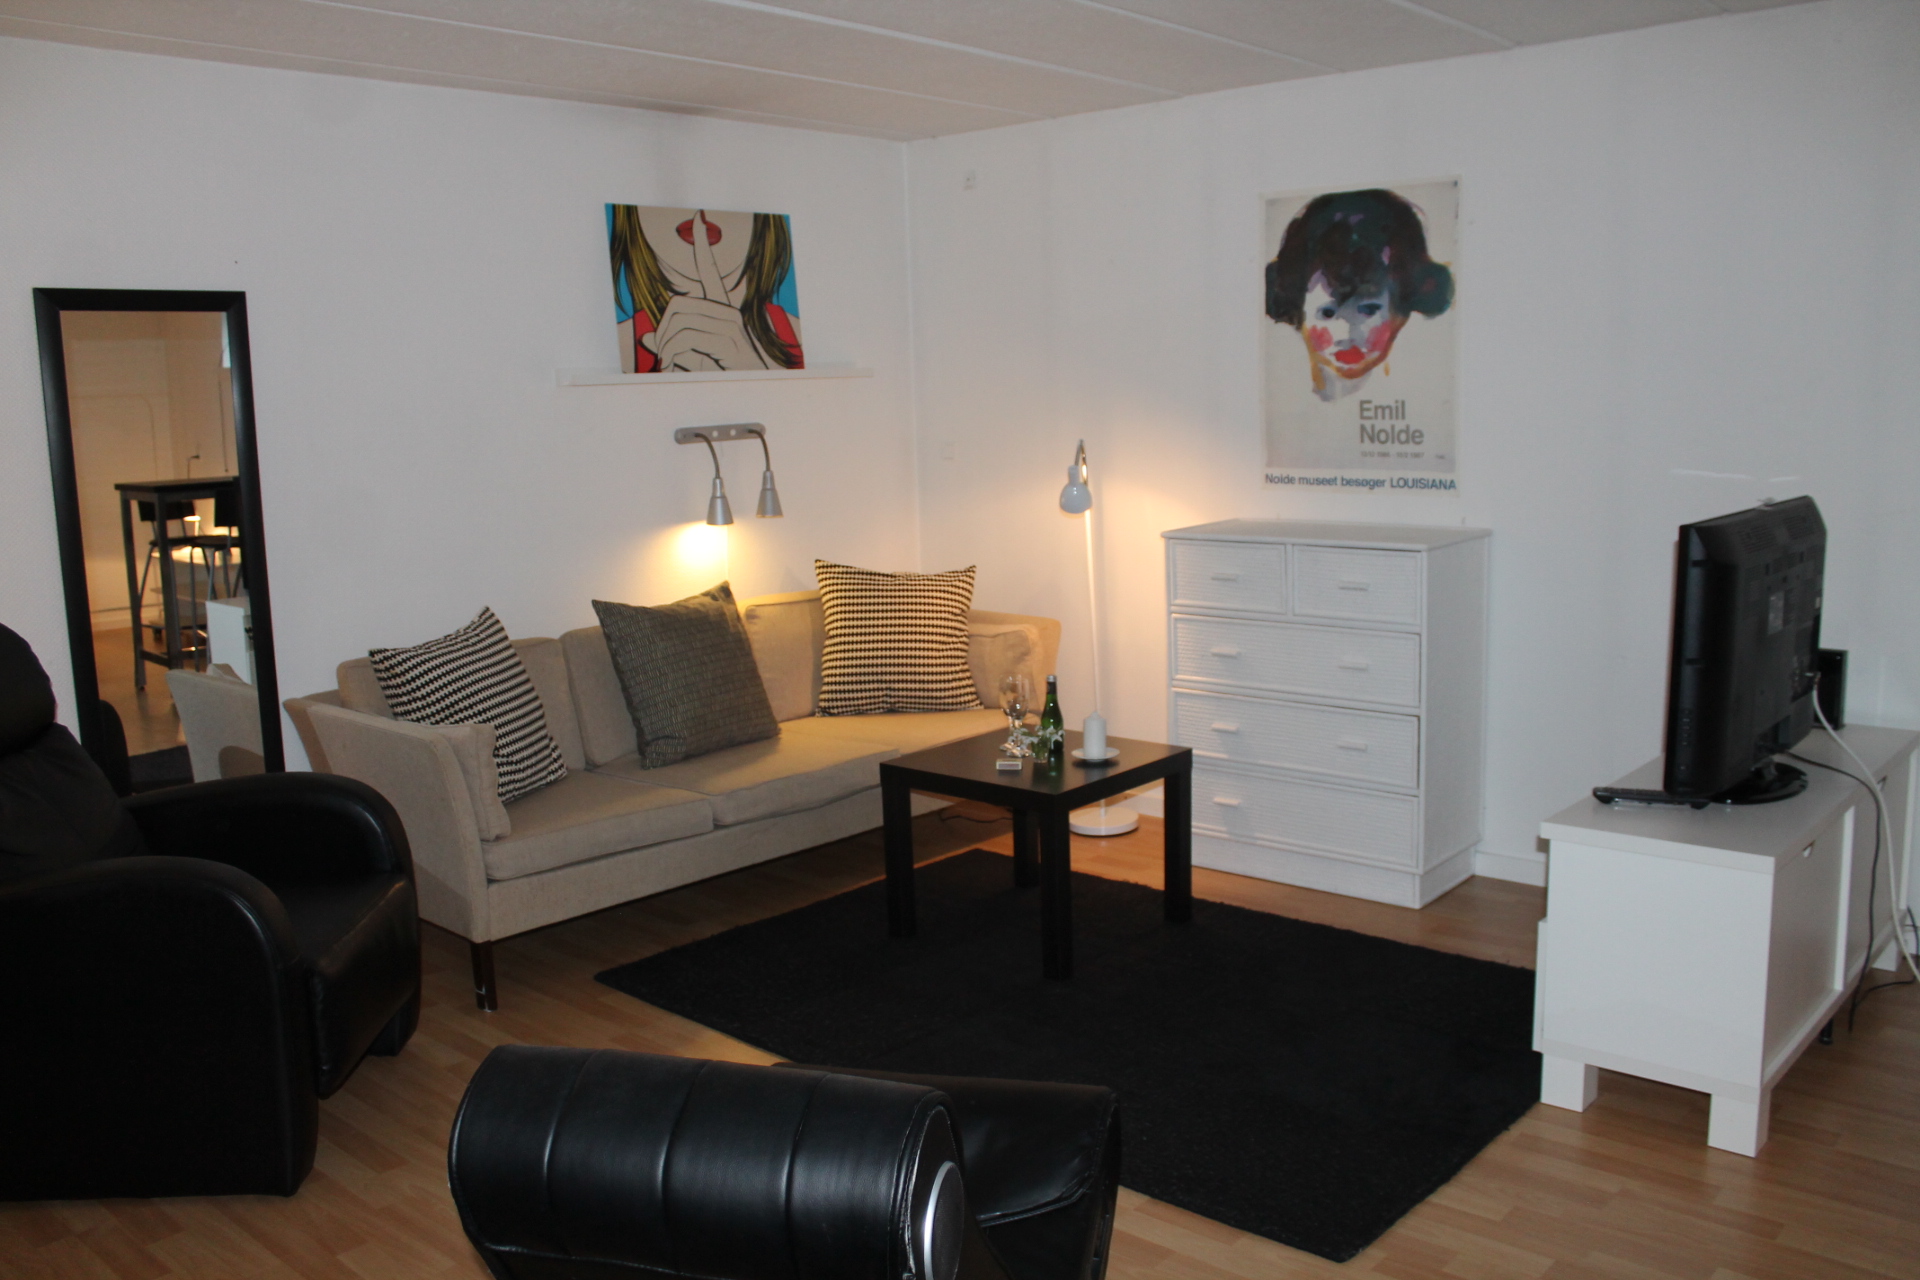 60 m2 Studio close to Roskilde and Køge - Apartments for Rent in Havdrup,  Solrød, Denmark